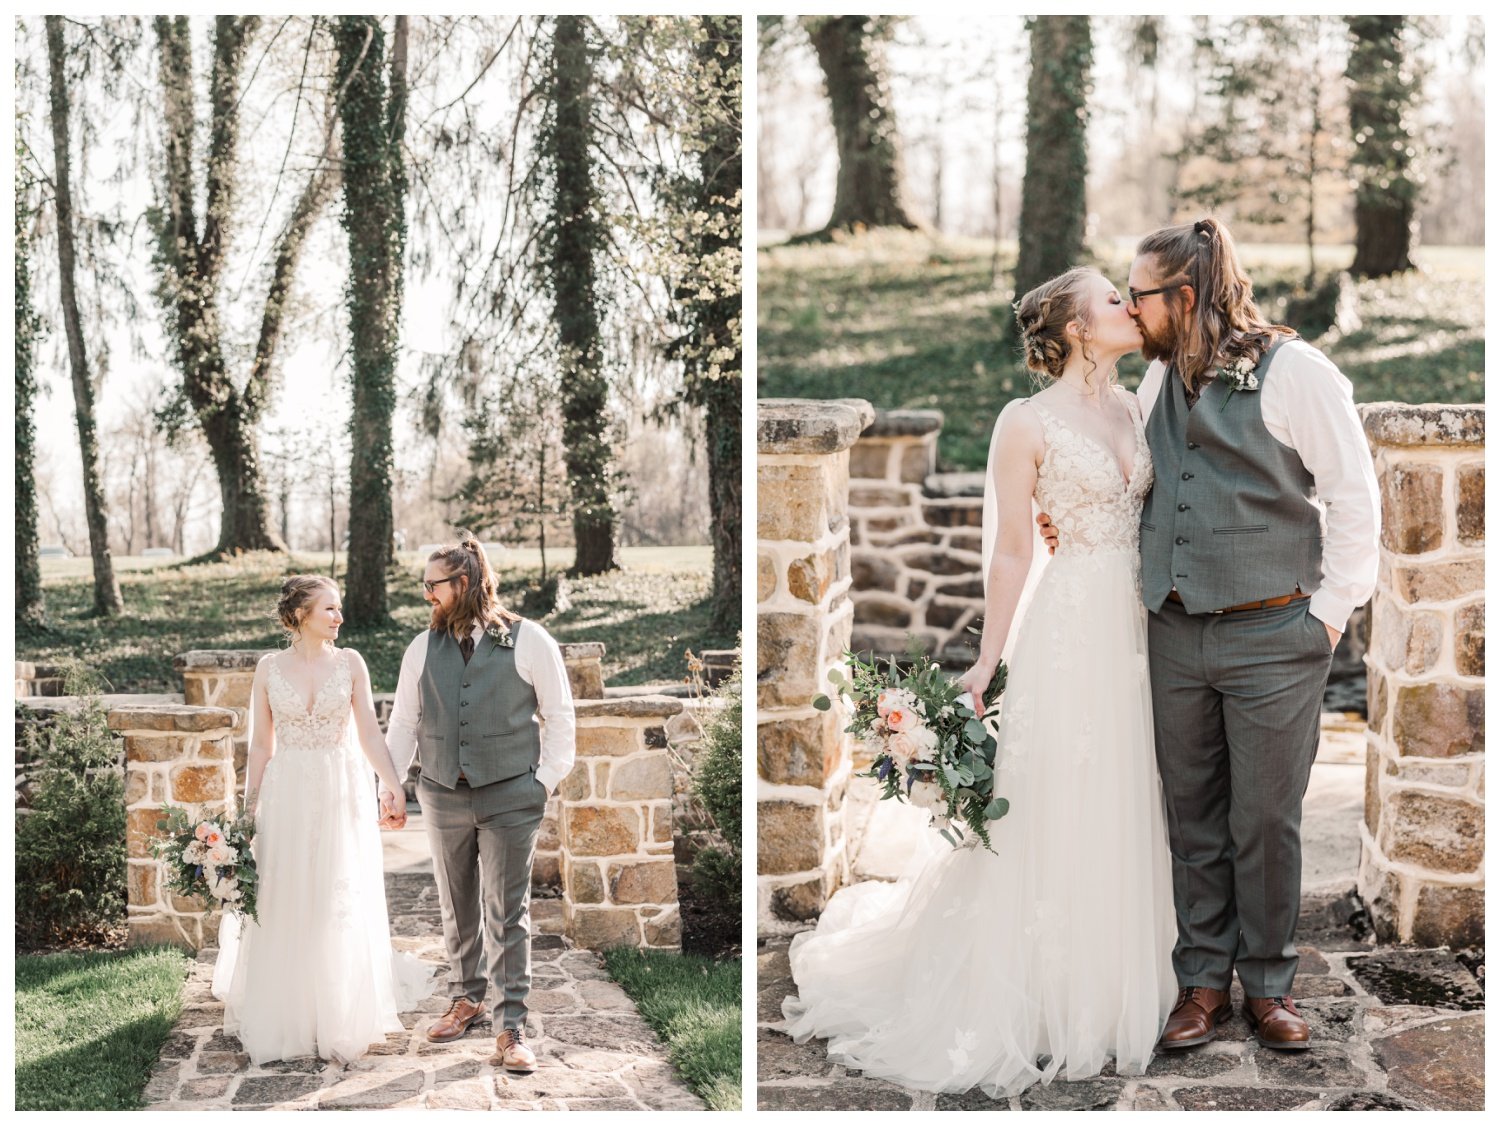 Historic Shady Lane wedding, Manchester PA, bride and groom portrait